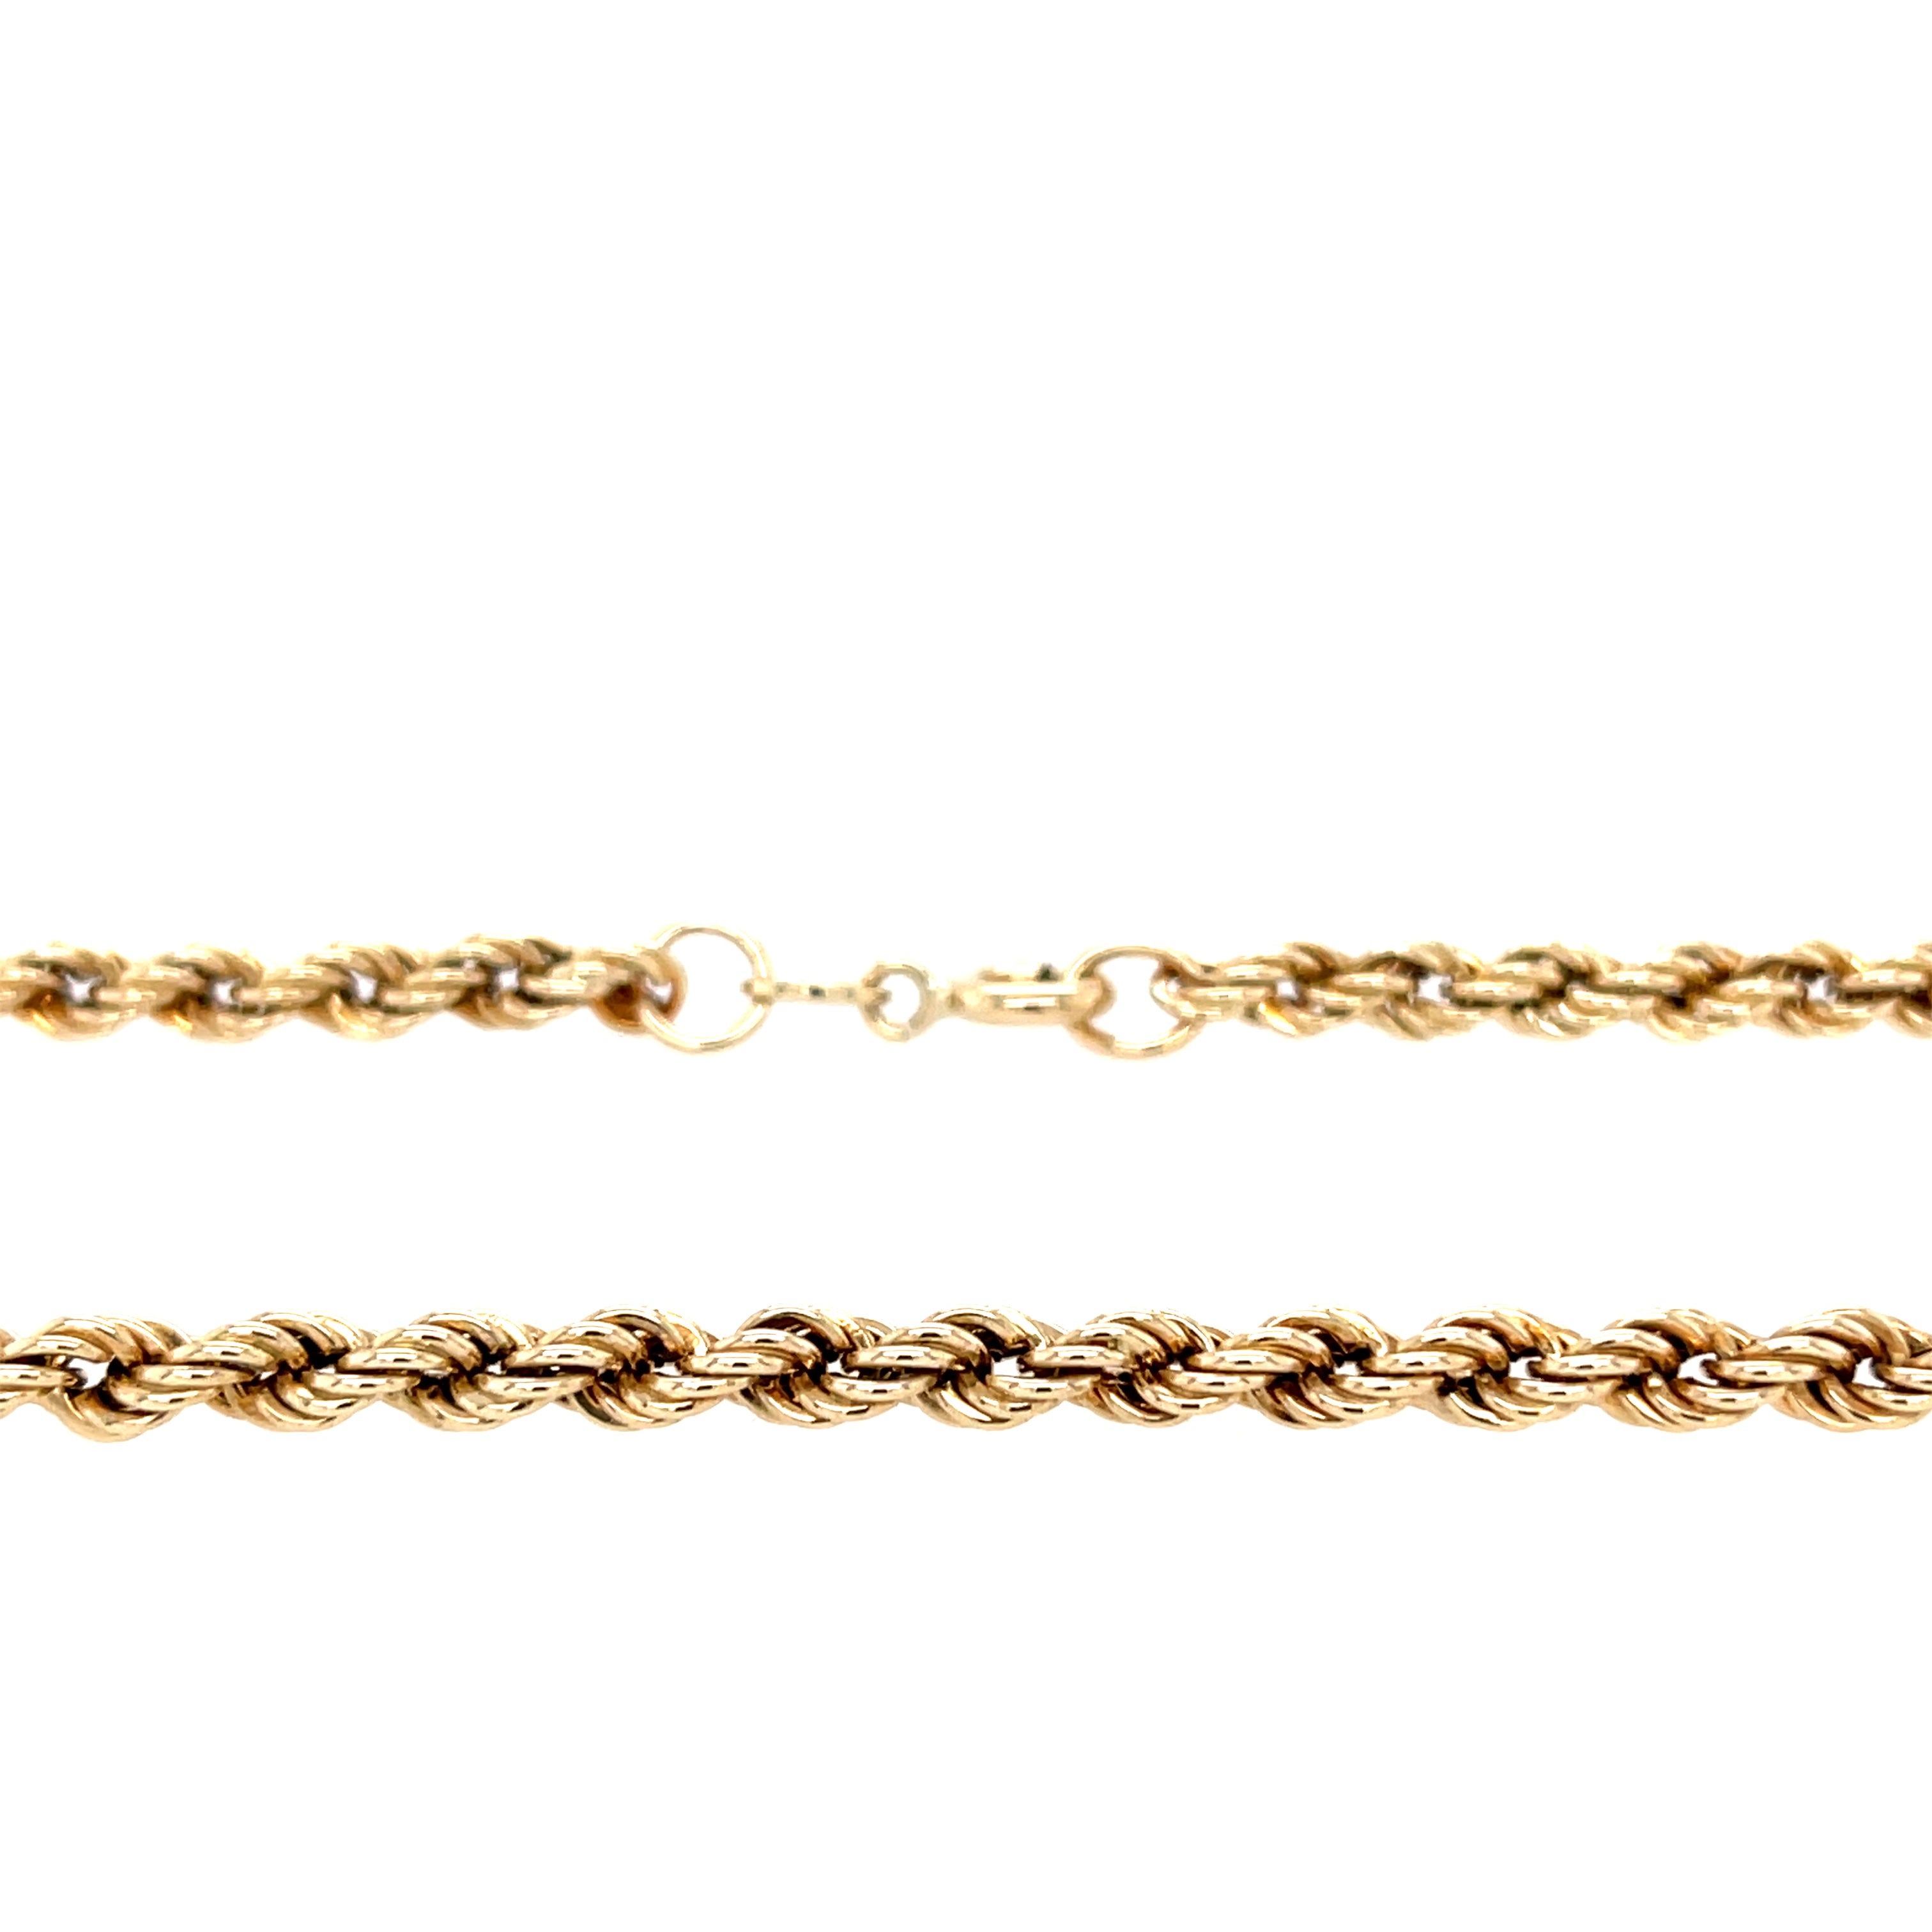 9ct Yellow Gold Hollow 18" Rope Chain - 5.38g SOLD